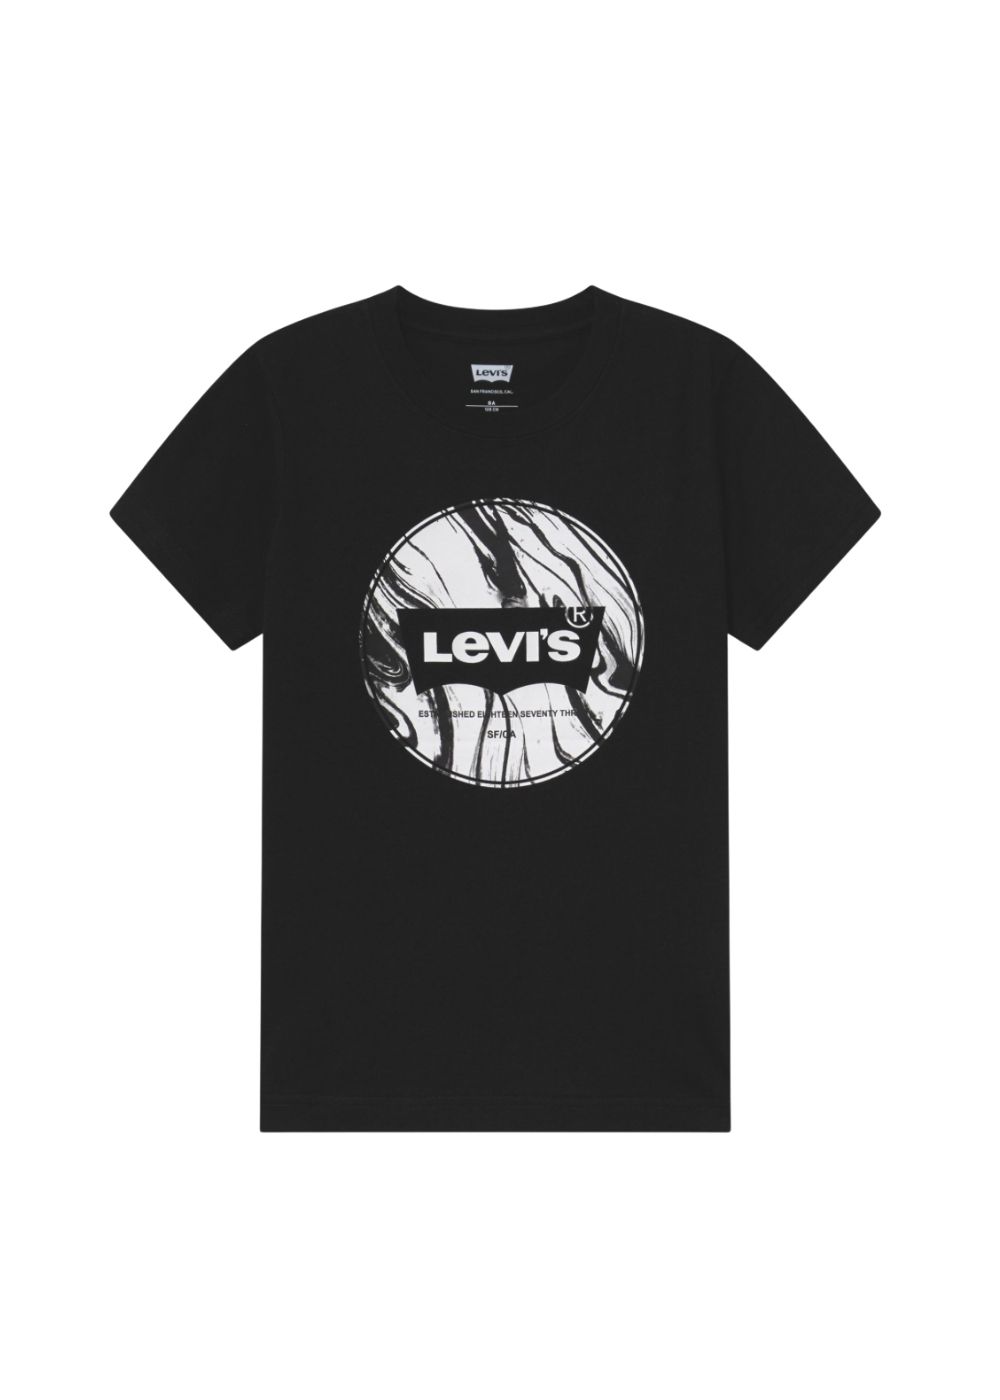 Featured image for “Levi's T-shirt Logo”